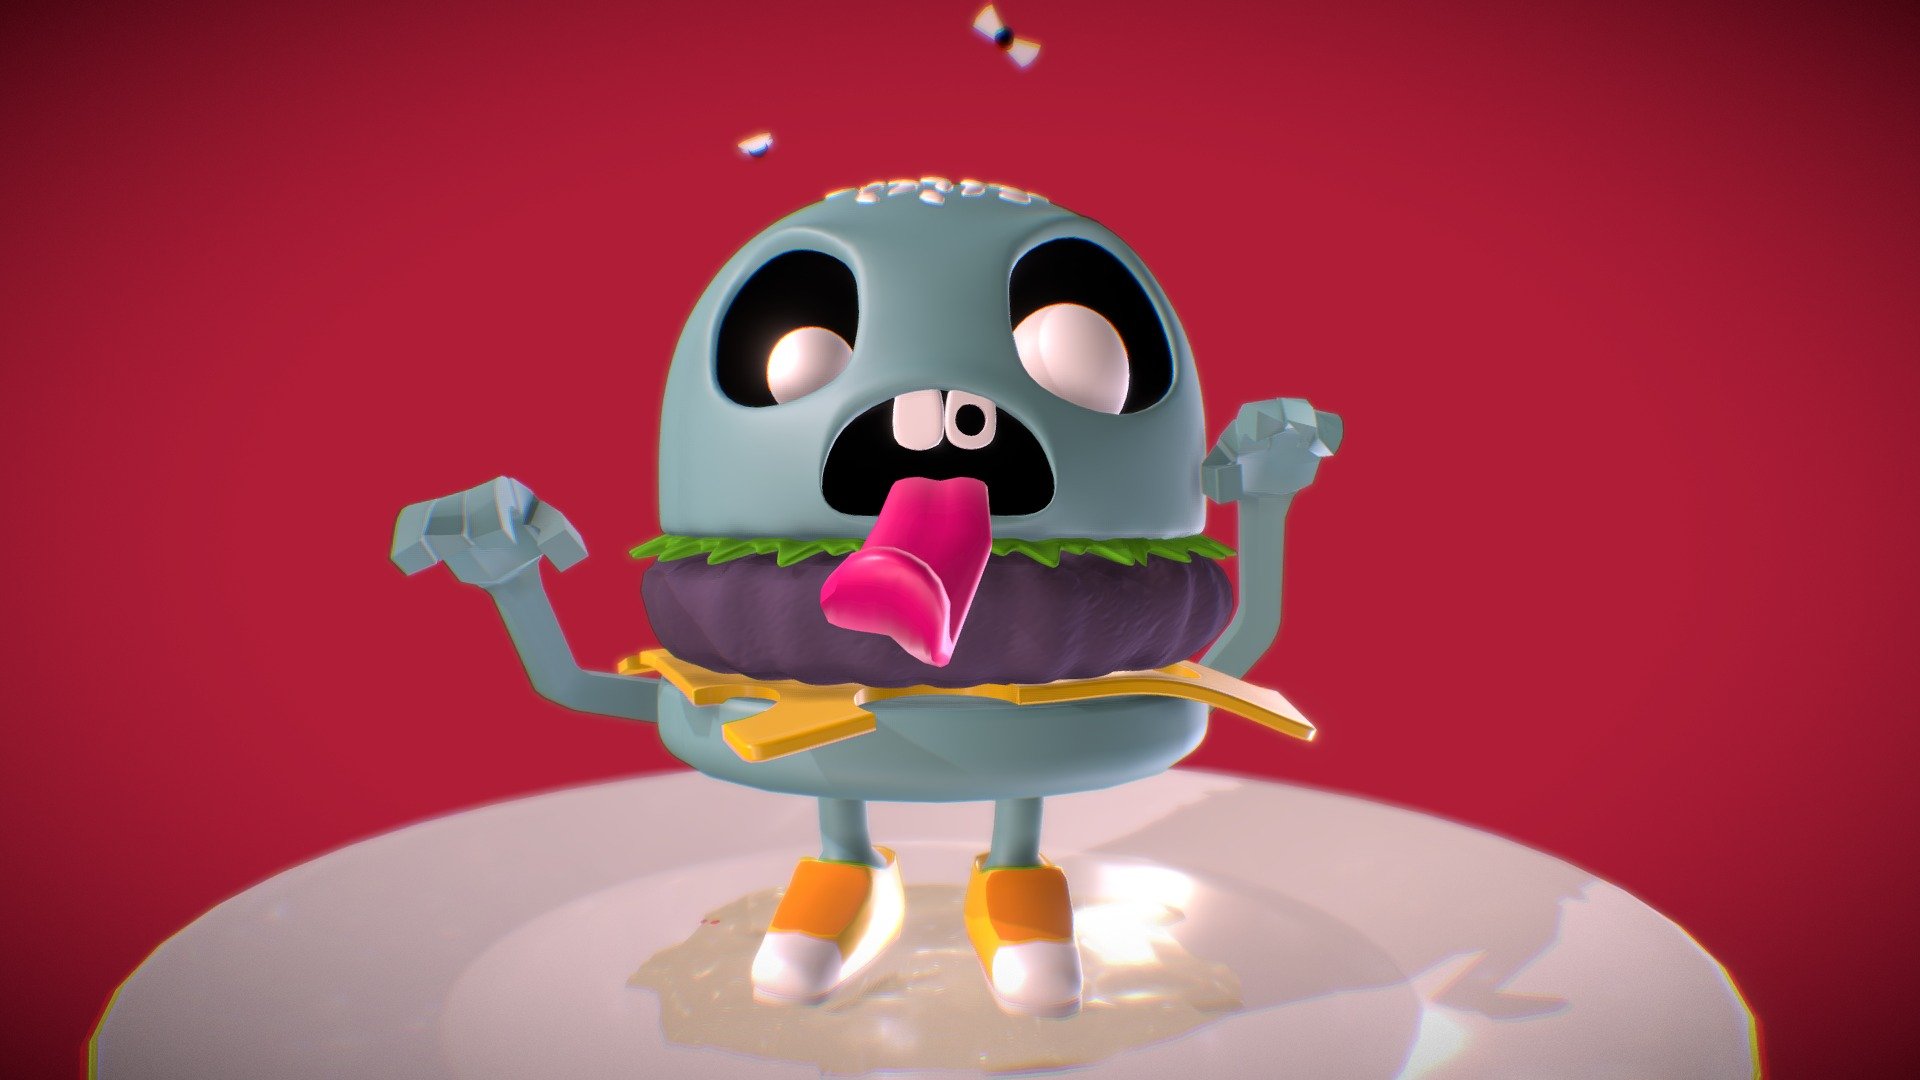 ¿Did someone order ZomBurguer?
You shouldn't eat this rotten zombie harmburguer&hellip; its meat is infected 3d model